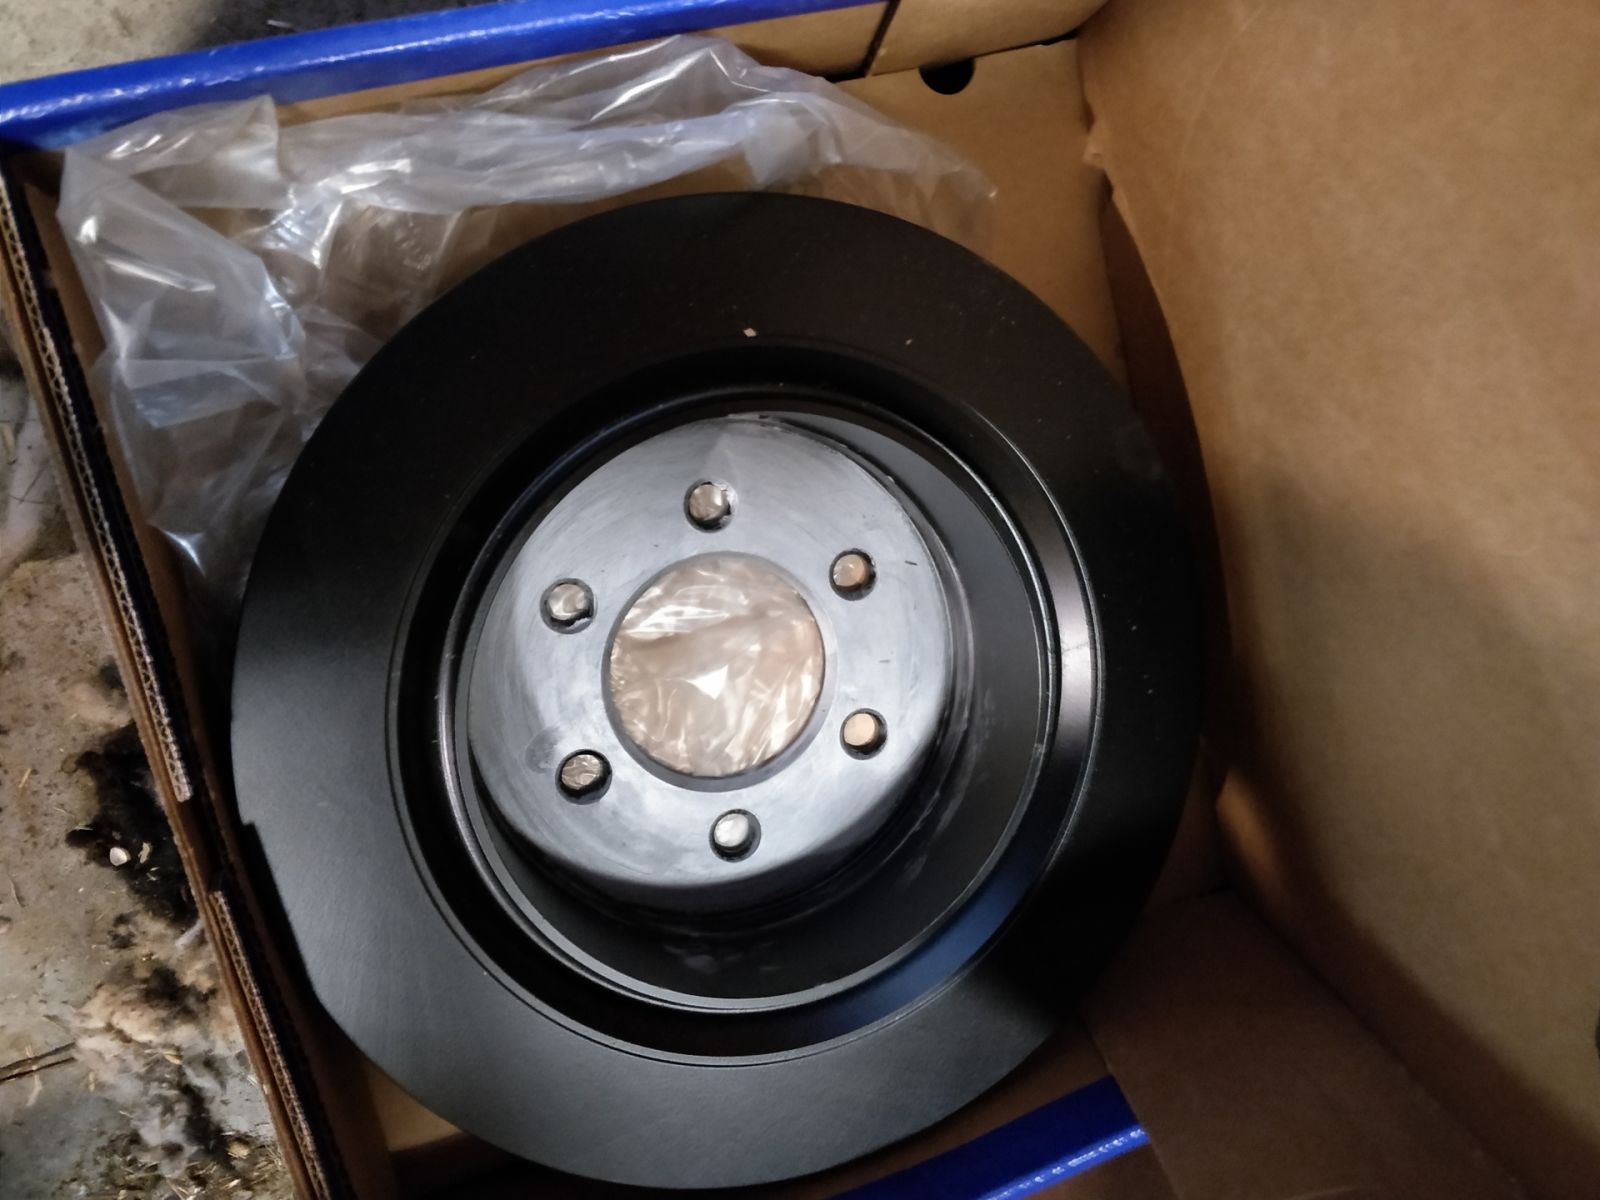 Part number matches the order, pads are correct, but whatever these are for its *NOT* a 2018 F150. They have a drum for a concentric parking brake... Wrong diameter too... Though the bolt pattern and hub diameter is correct though, so maybe another Ford product? 